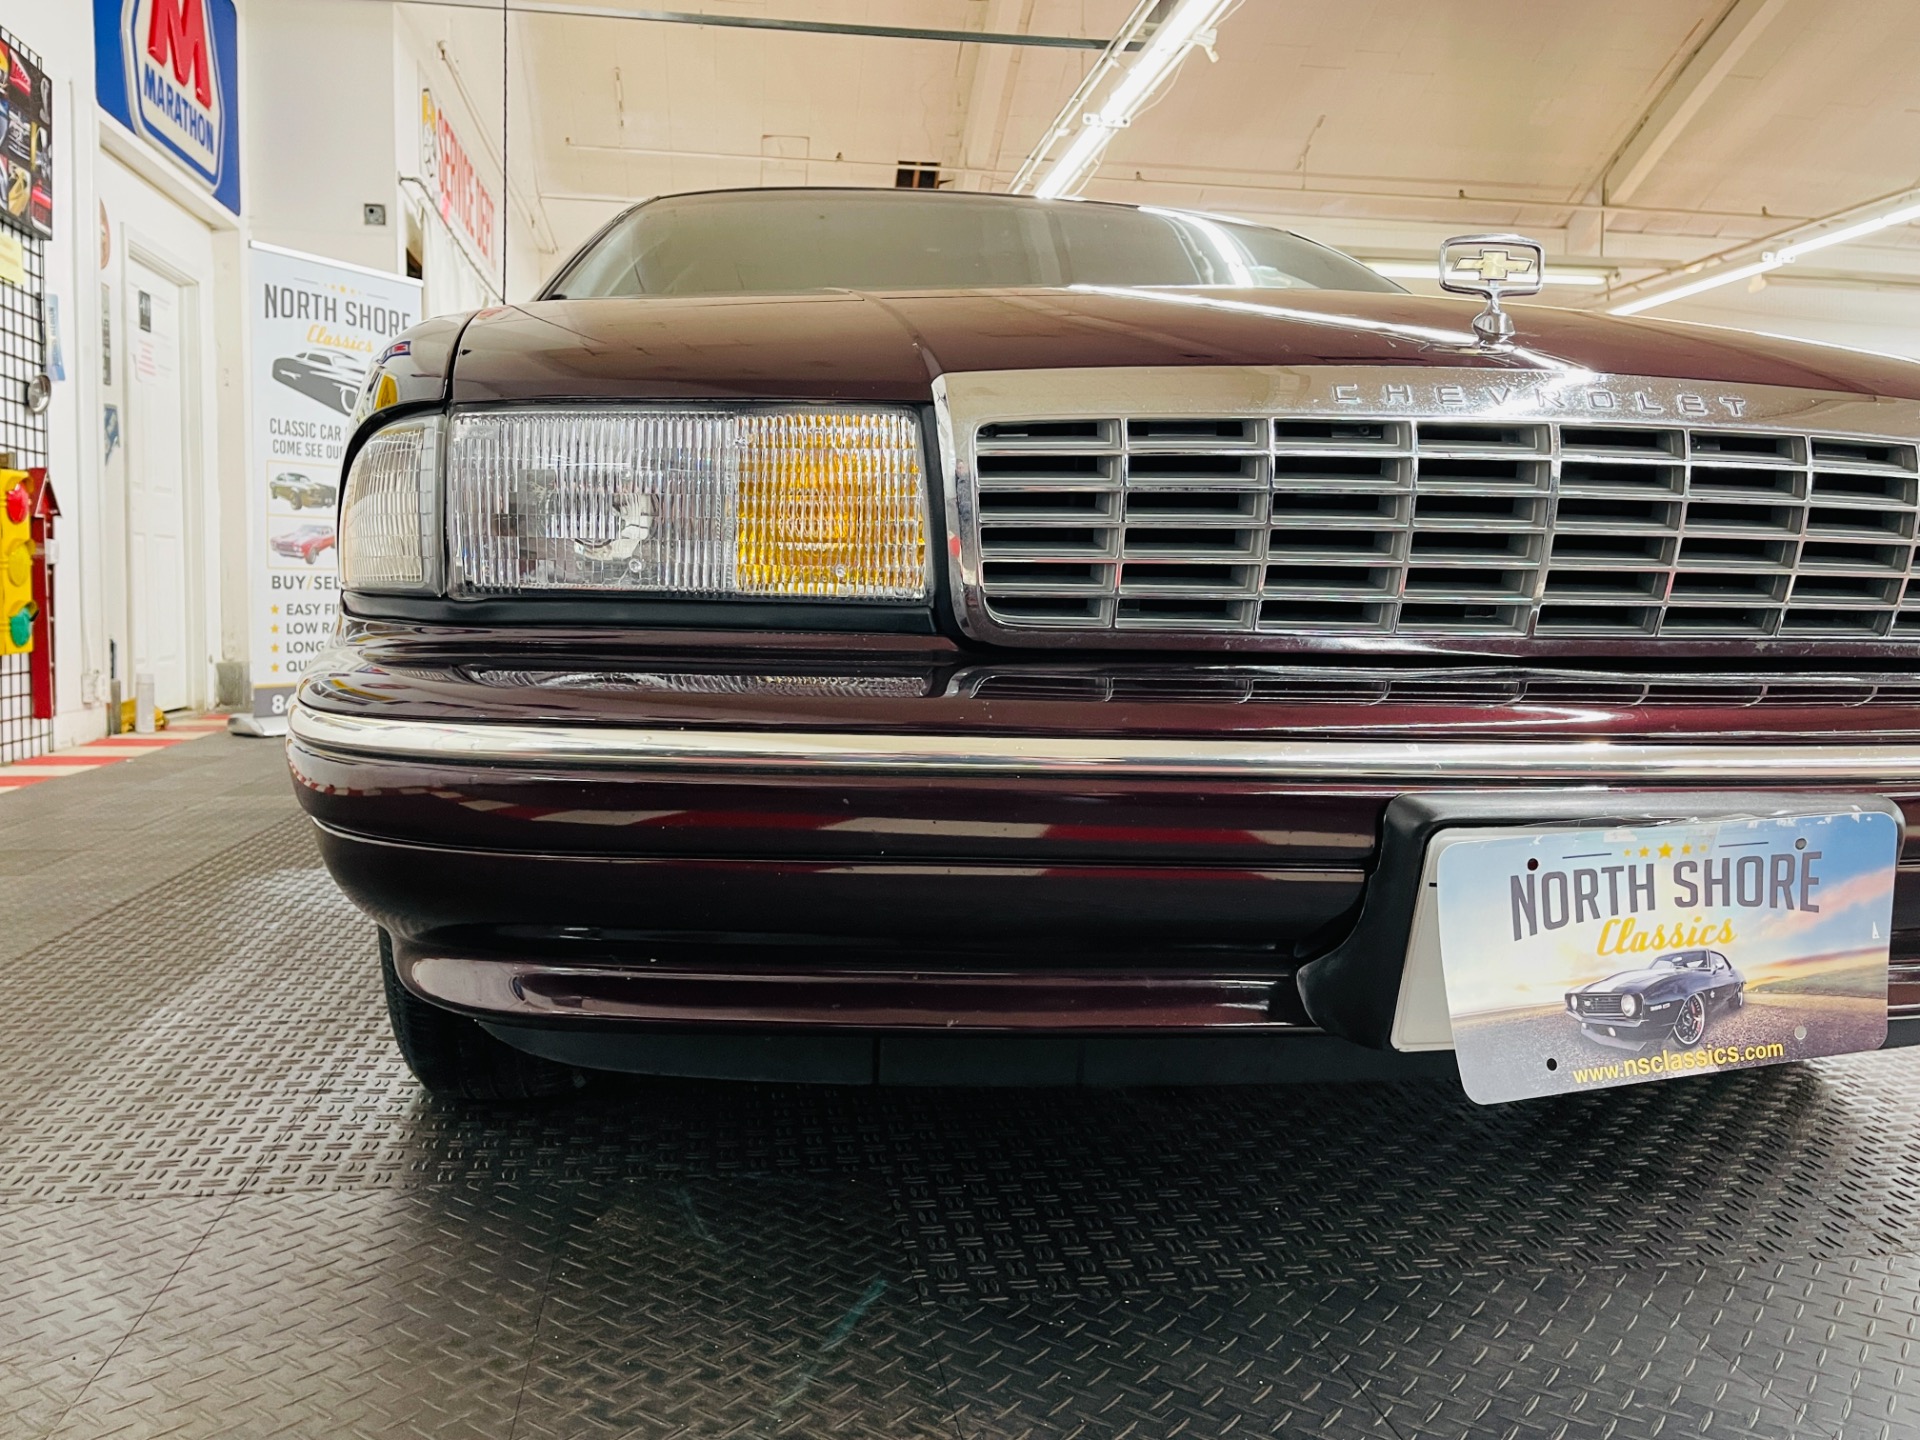 Used 1994 Chevrolet Caprice - ONE FAMILY OWNED SINCE NEW - LIKE NEW CONDITION - SEE VIDEO - | Mundelein, IL